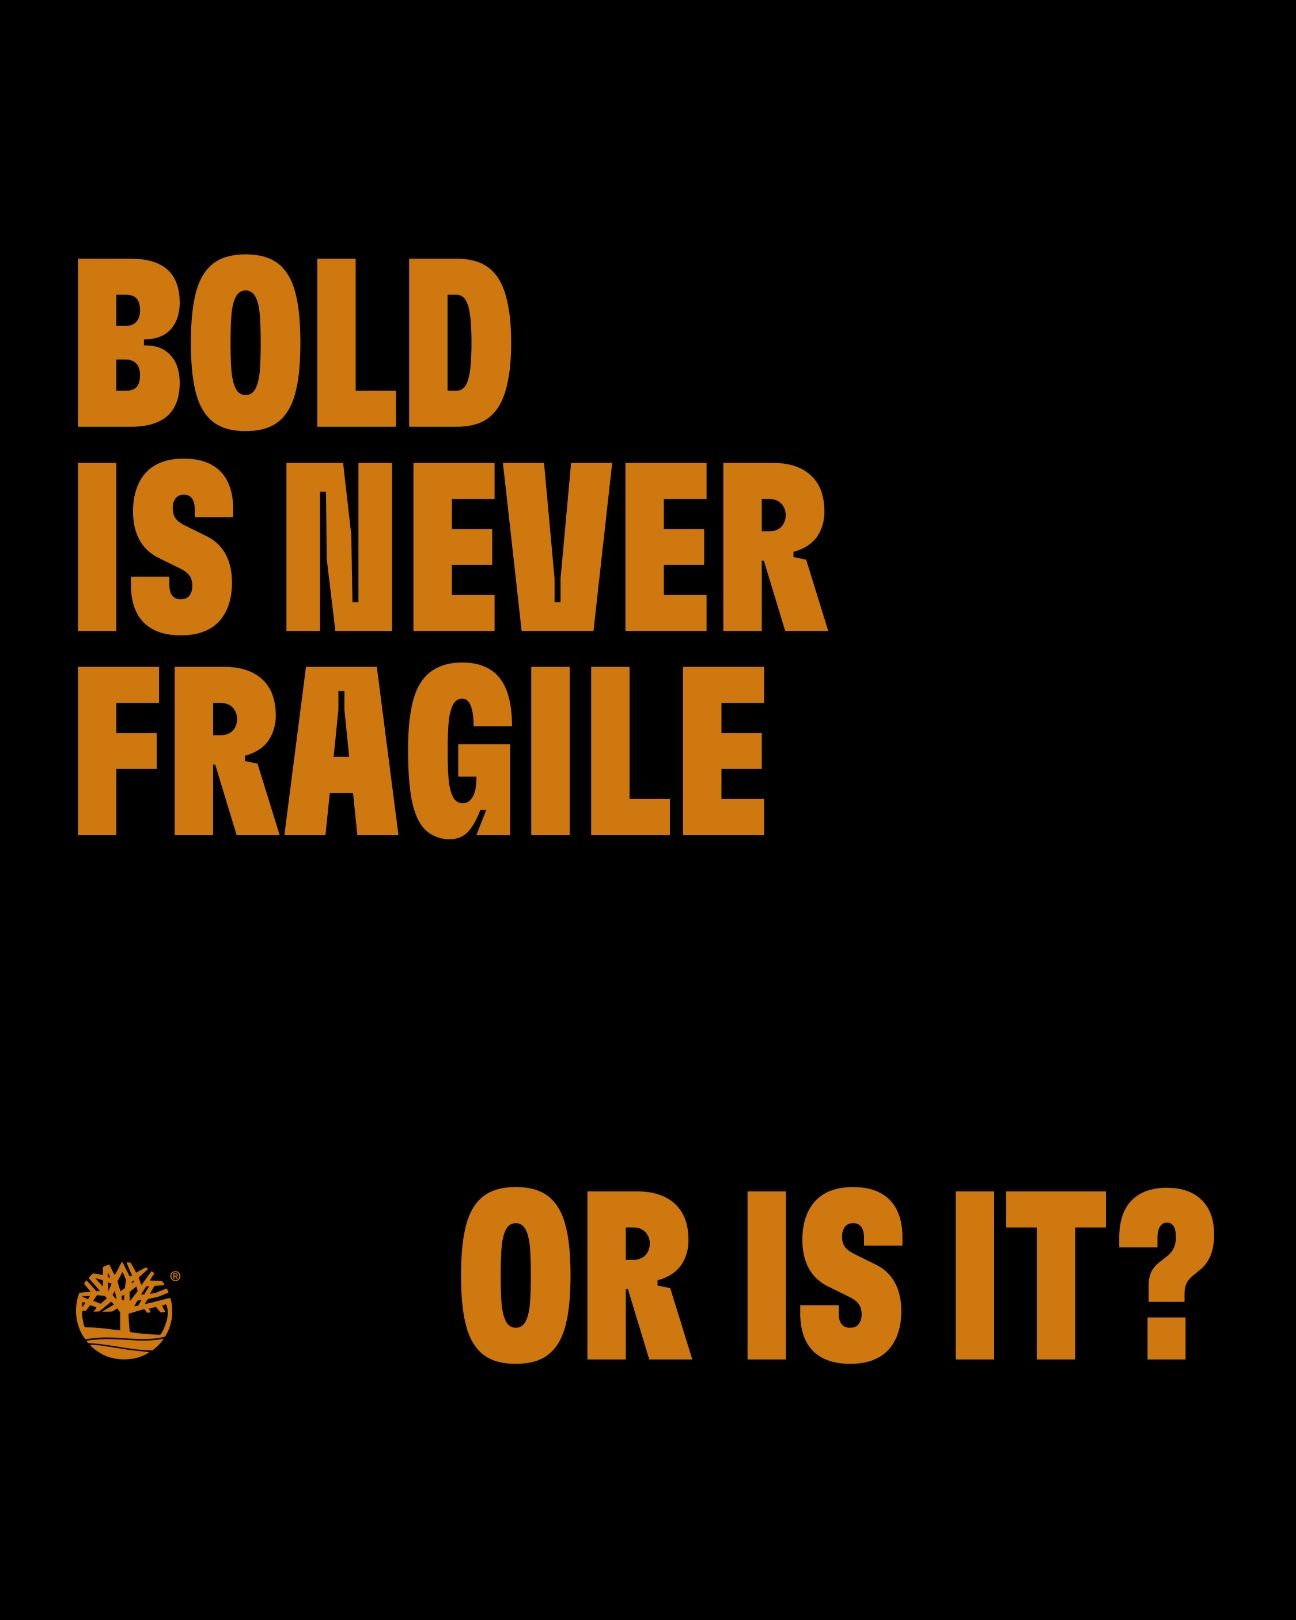 Bold is never fragile. Or is it?